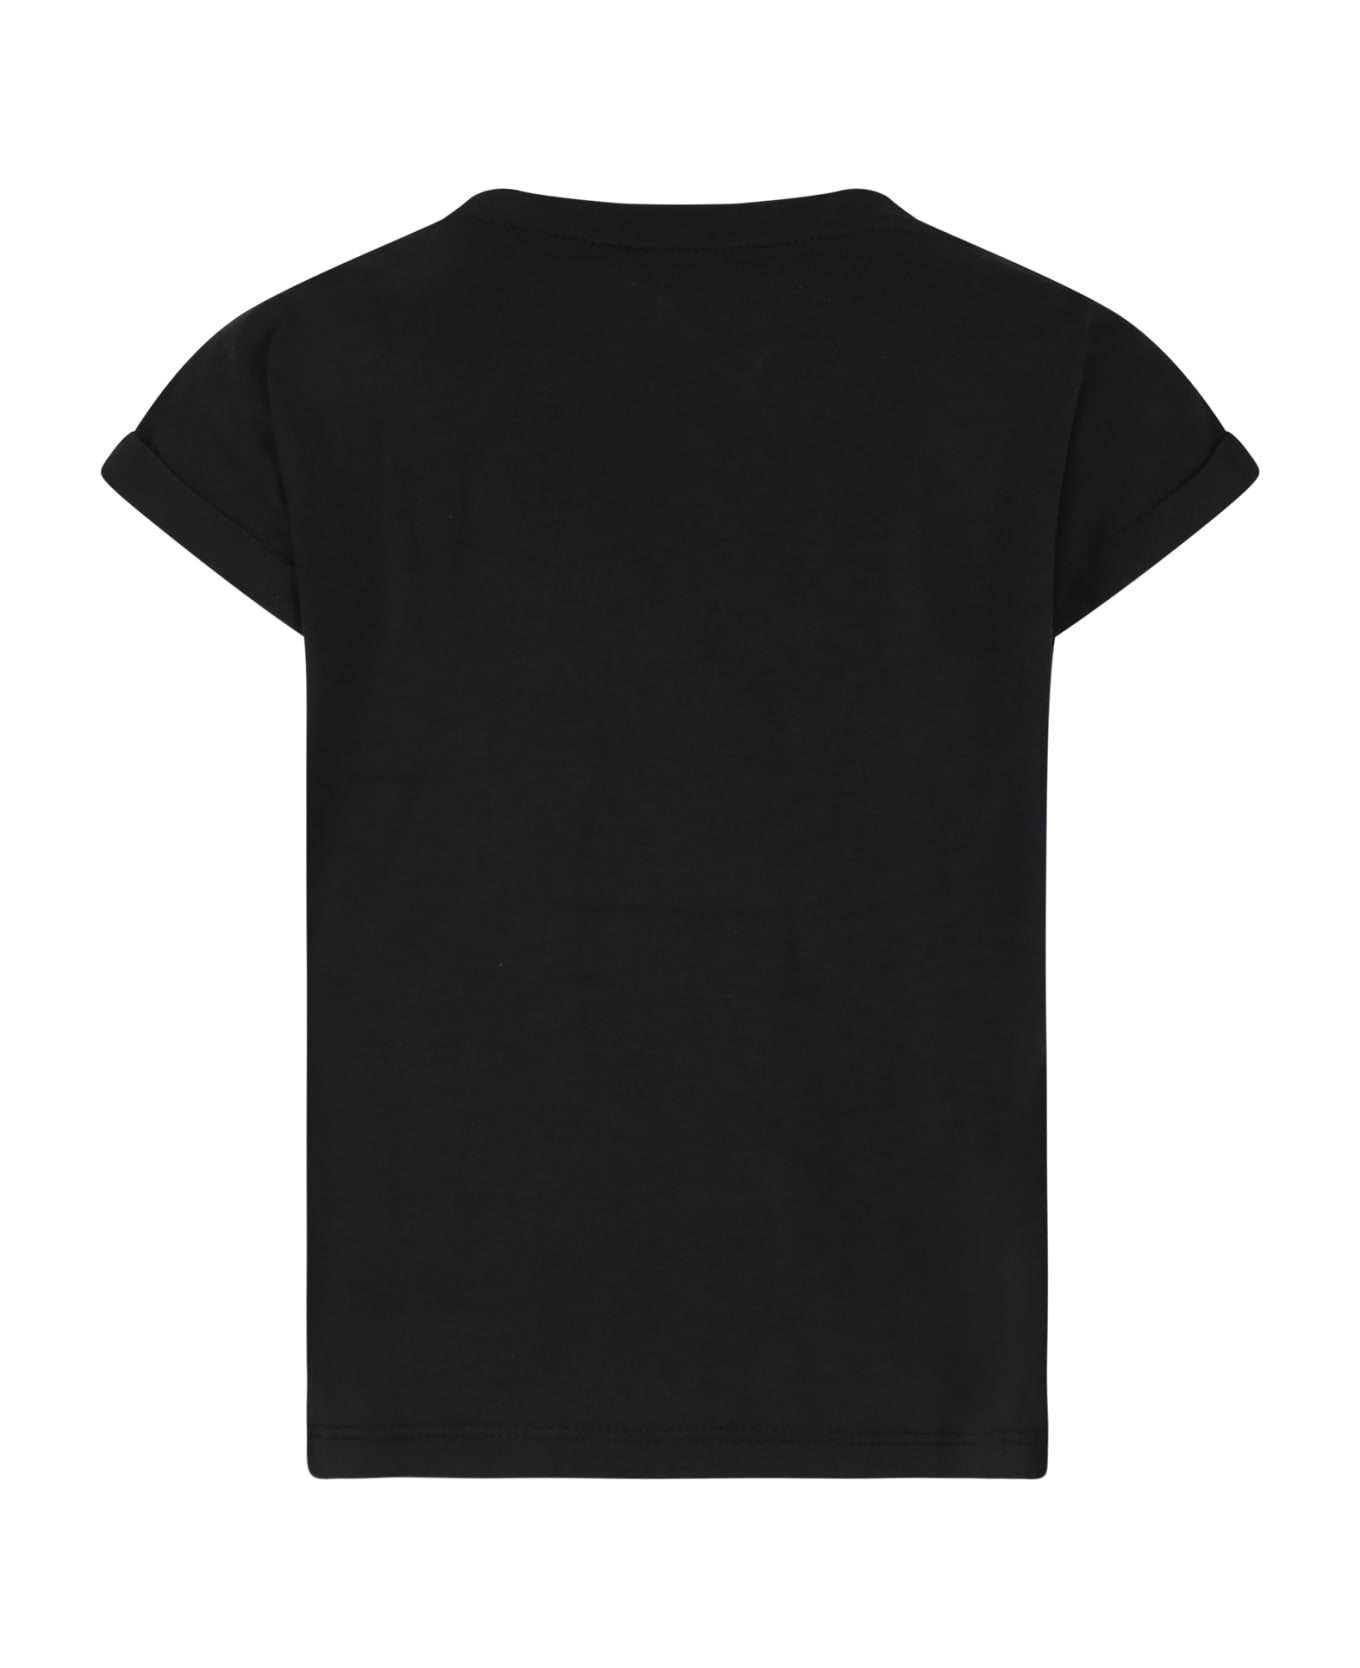 DKNY Black T-shirt For Girl With Logo And Studs - Black Tシャツ＆ポロシャツ